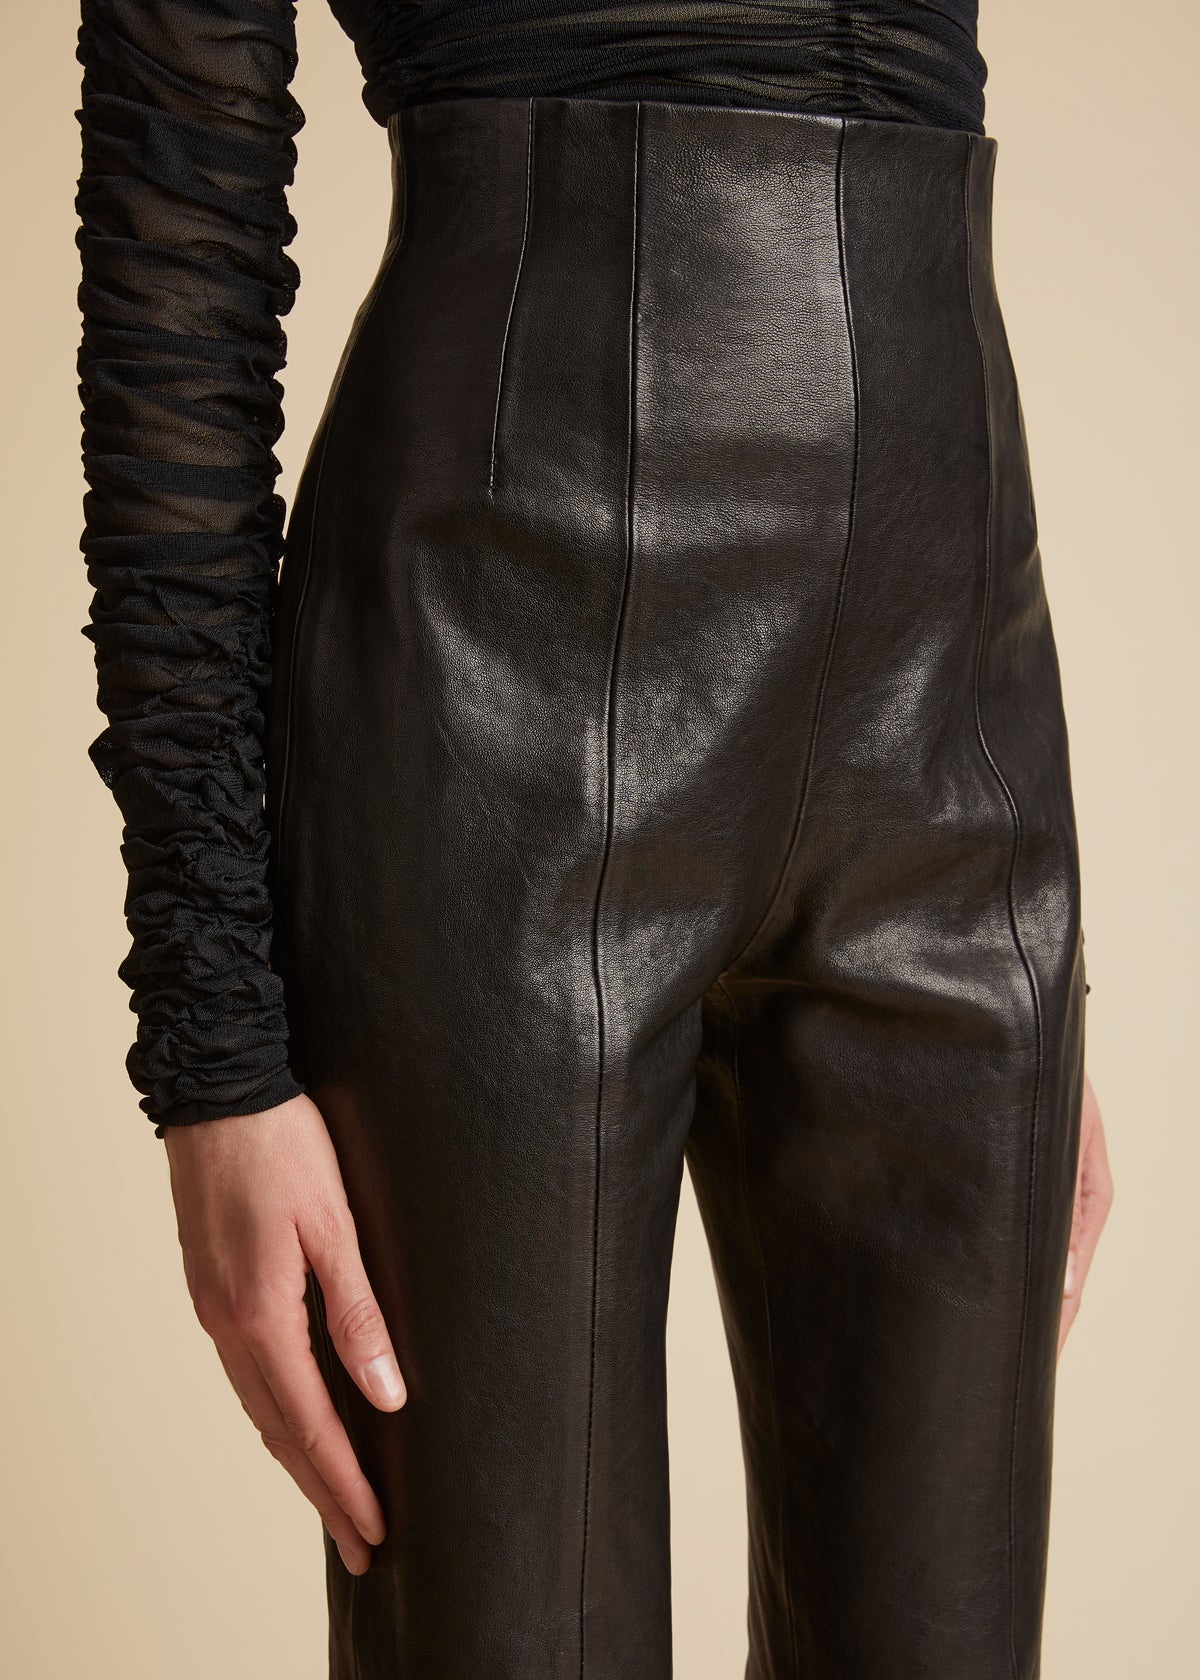 The Lenn Pant in Black Leather - 4